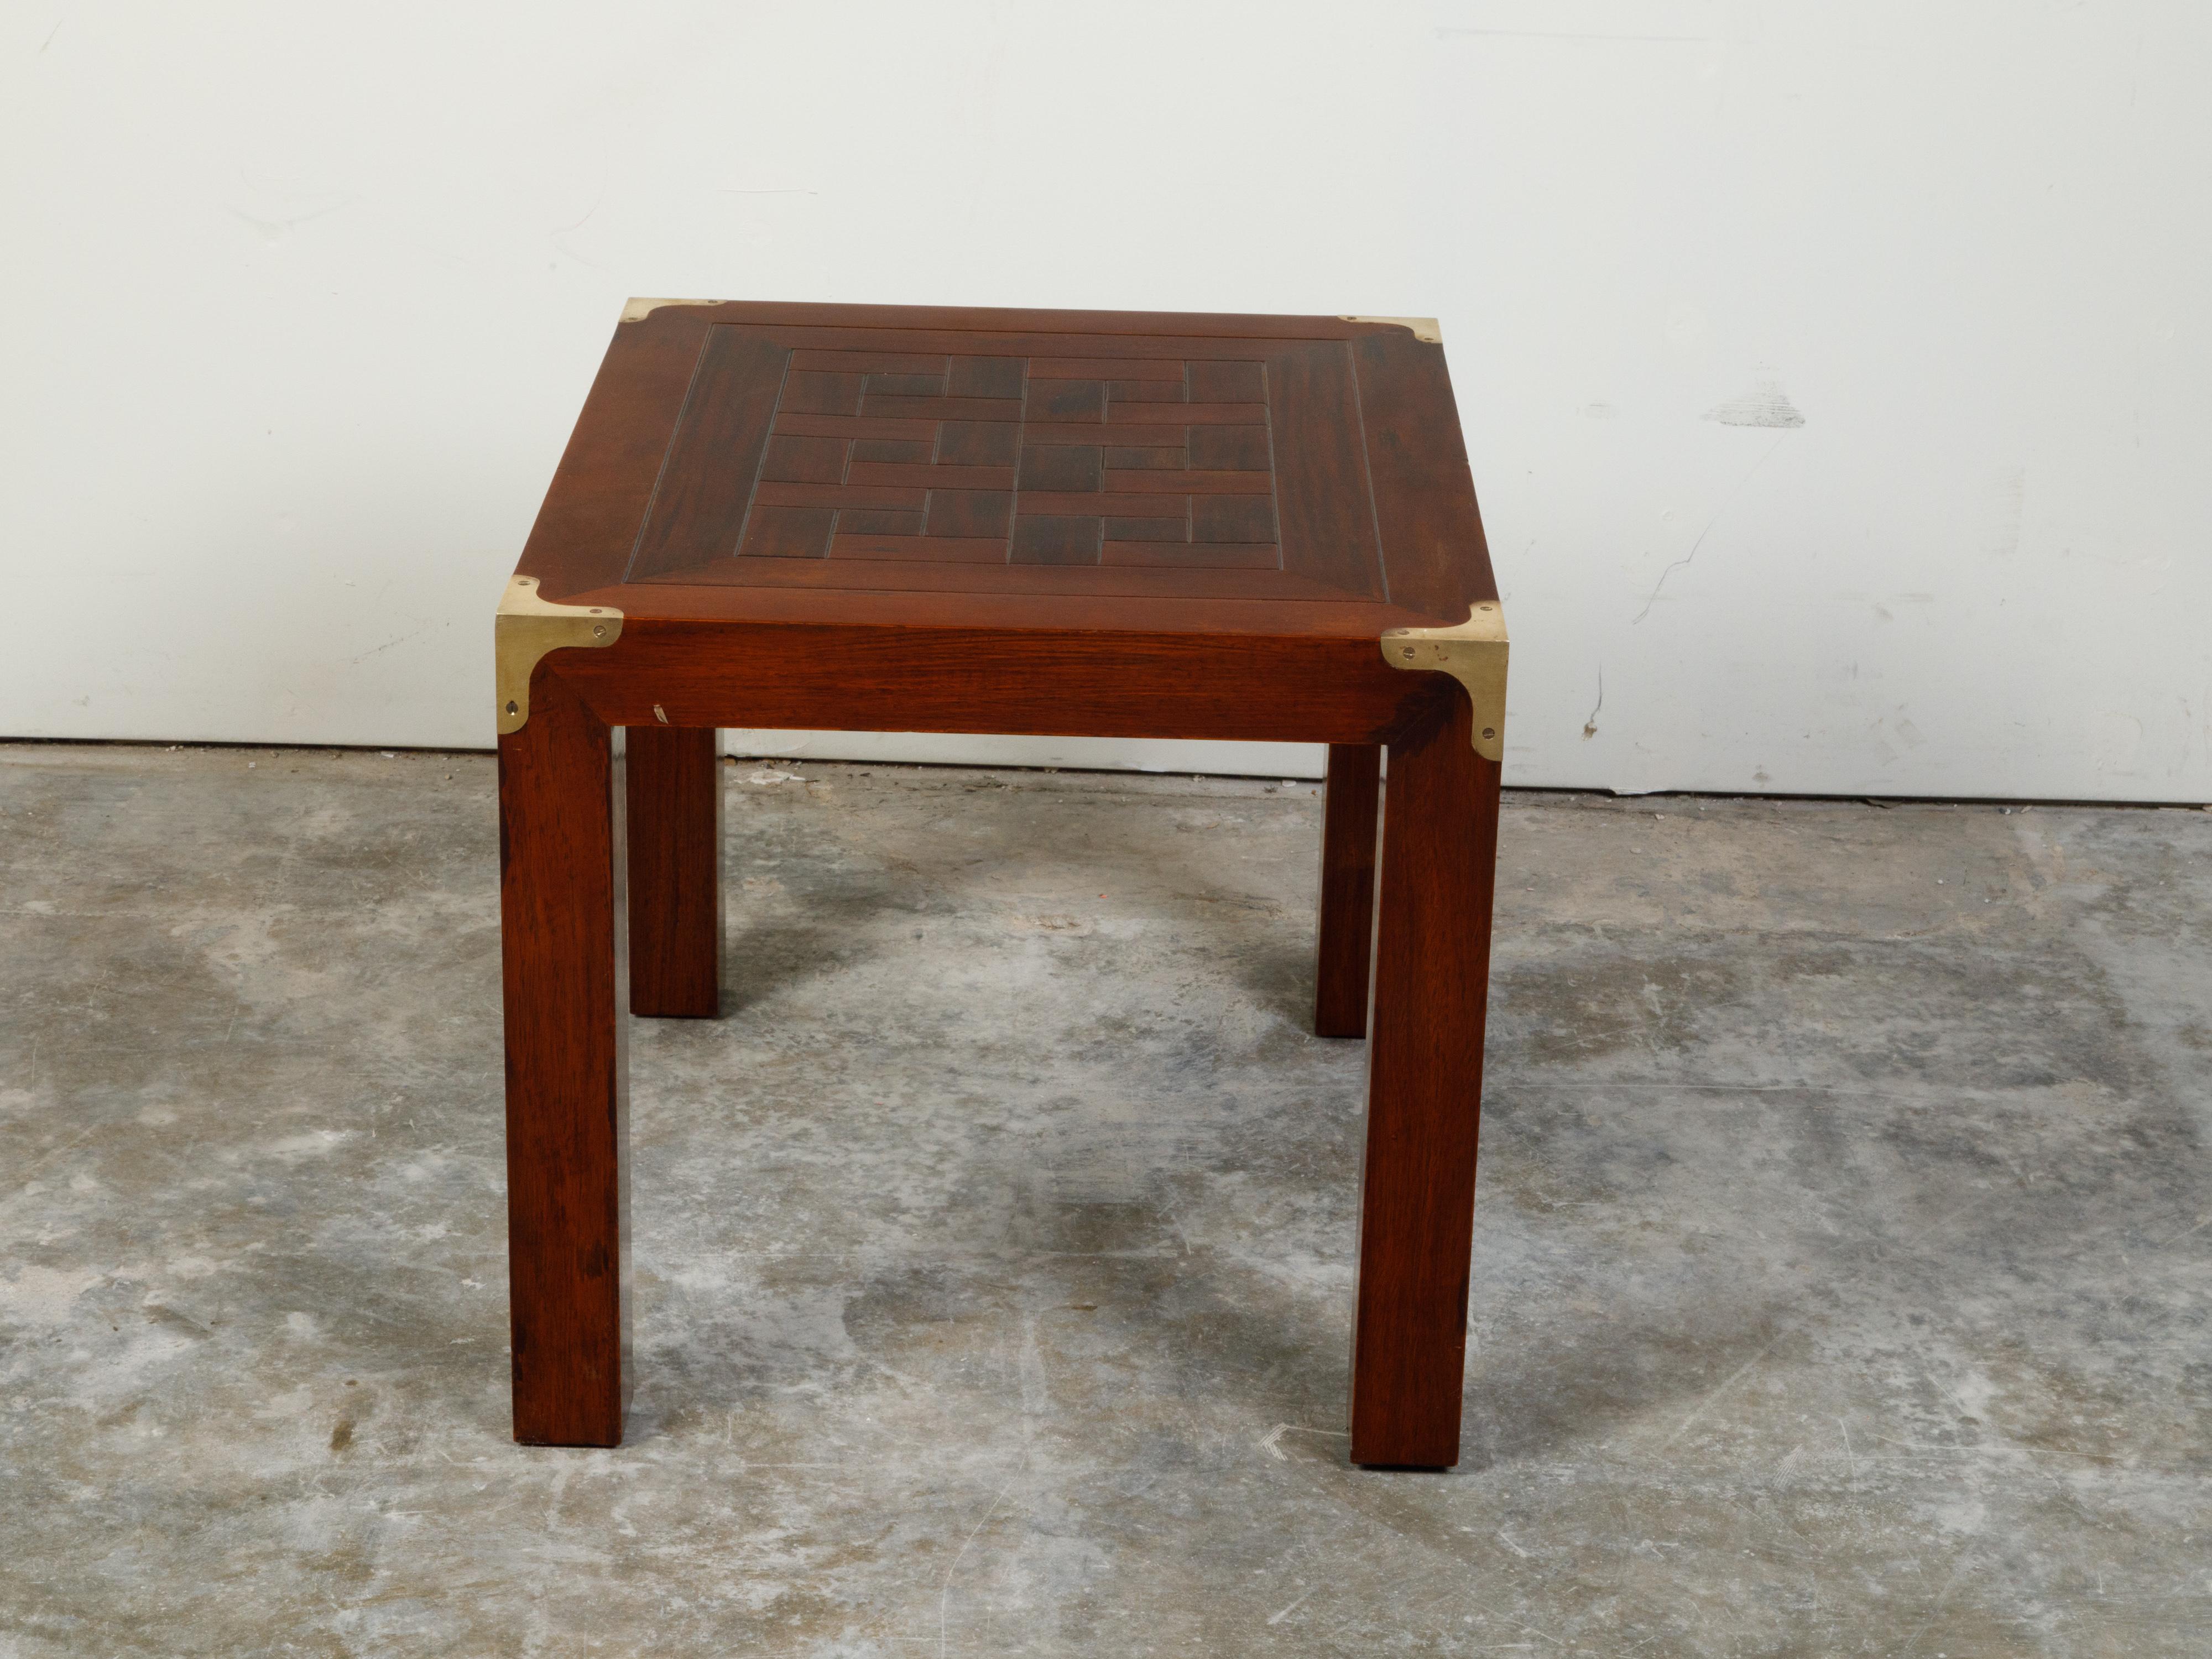 English Midcentury Campaign Style Side Table with Parquet Top and Brass Braces For Sale 2